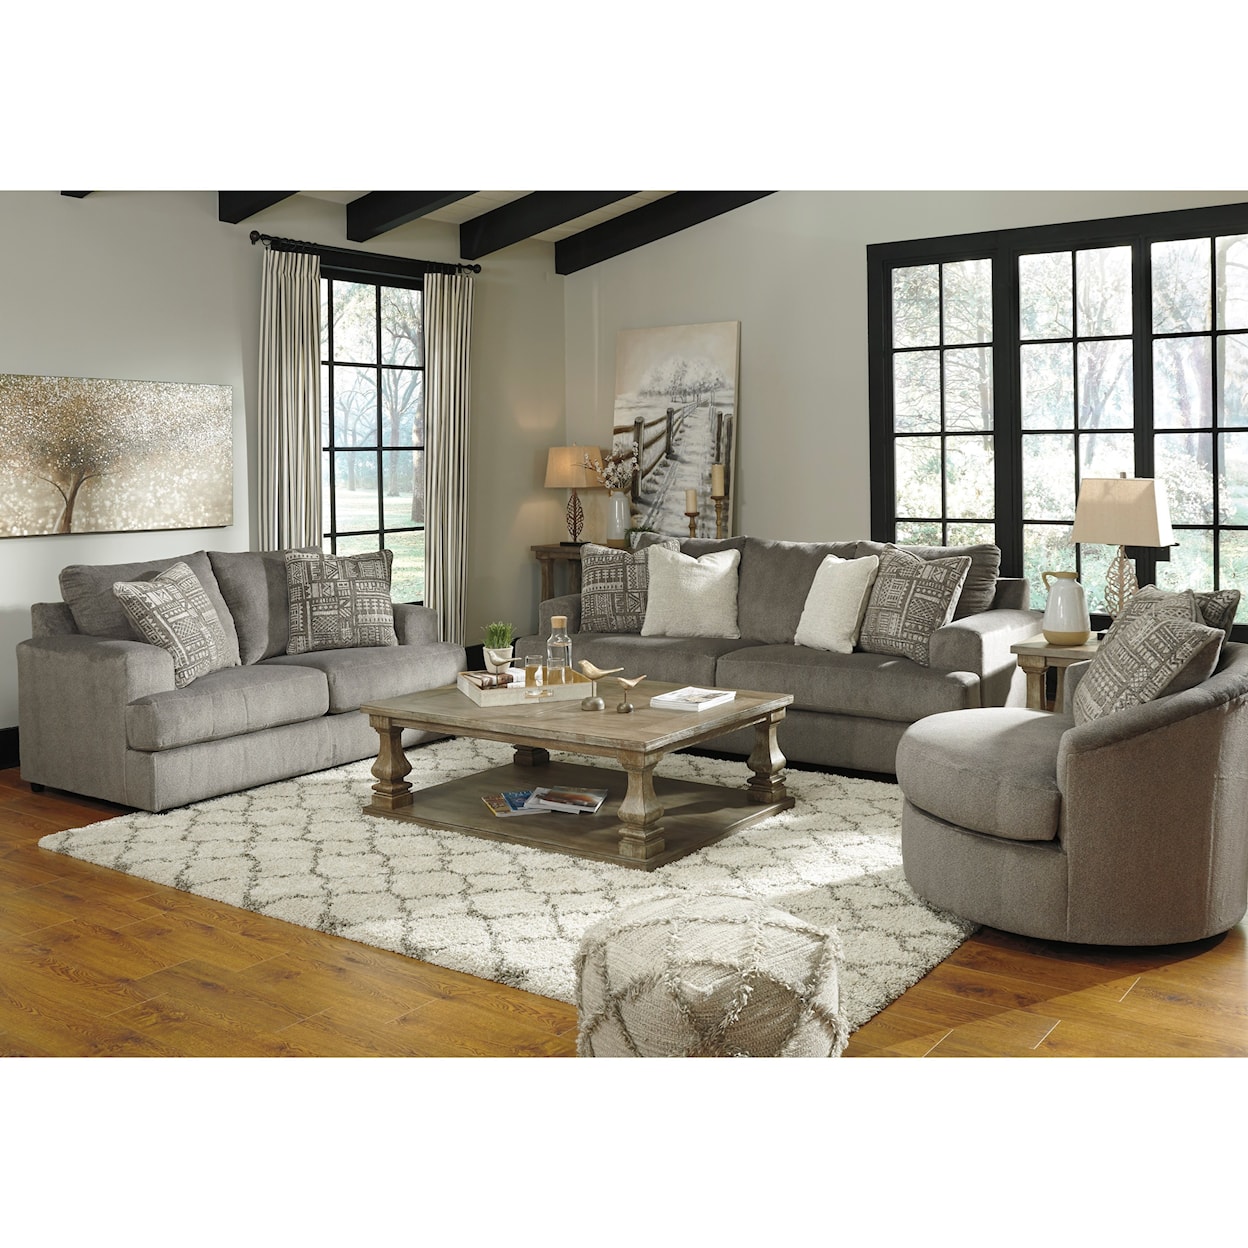 Signature Design by Ashley Soletren 3pc living room group